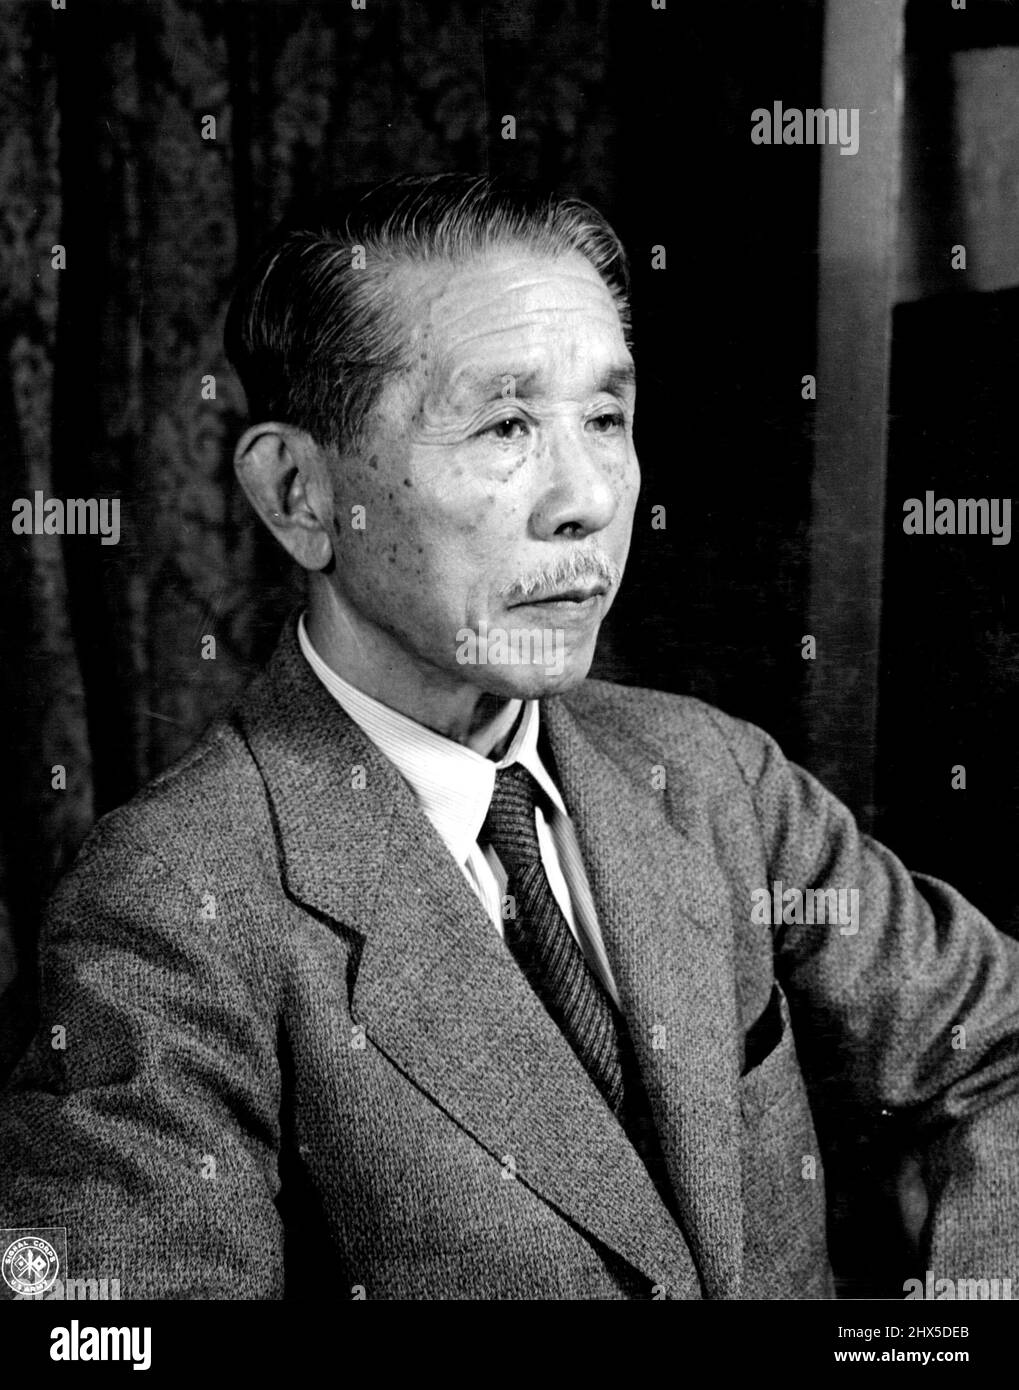 Alleged Major Japanese War Criminals : Koki Hirota, Prime Minister from March 1936 to Feb. 1937, and Foreign Minister under Saito, Okarh, and Konove, is one of the 25 alleged major Japanese war Criminals on trial at the international Military tribunal for the far east in Tokyo, Japan. August 25, 1947. (Photo by Skinner, U.S. Army Signal Corps). Stock Photo